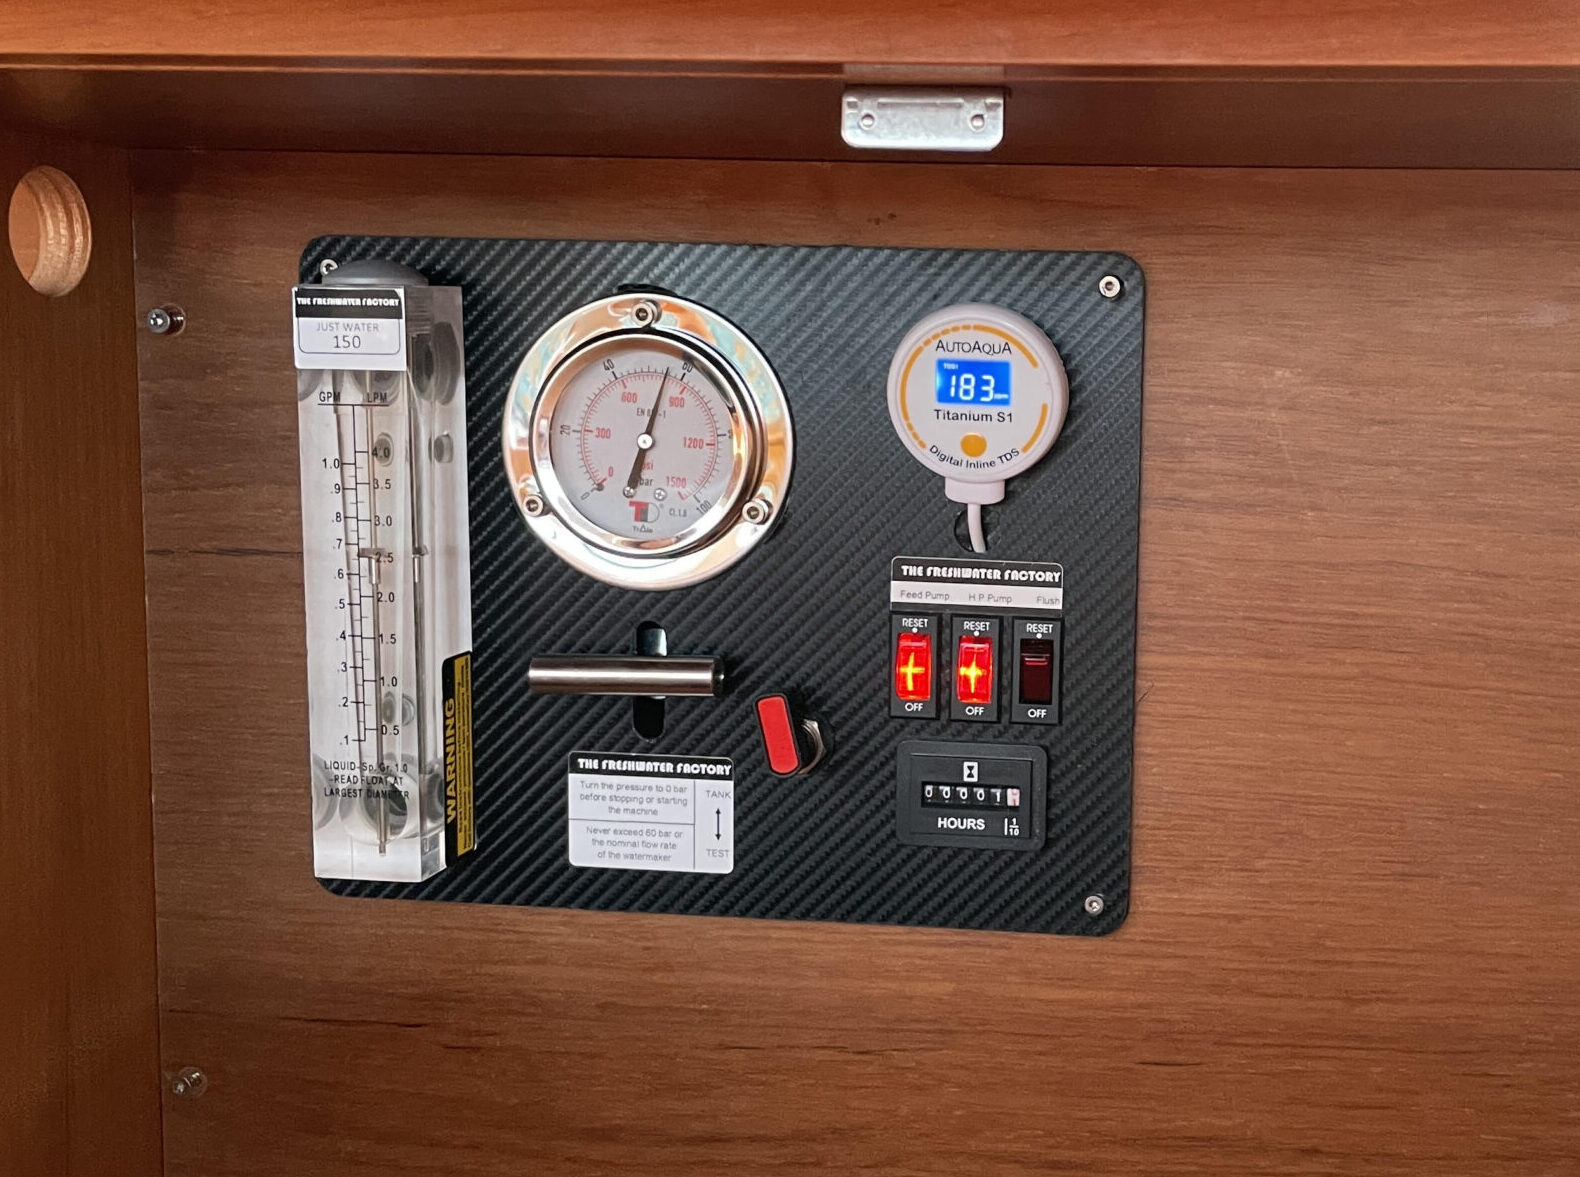 Watermaker control panel - Marine watermaker for sailboat - water makers for boats - watermakers marine